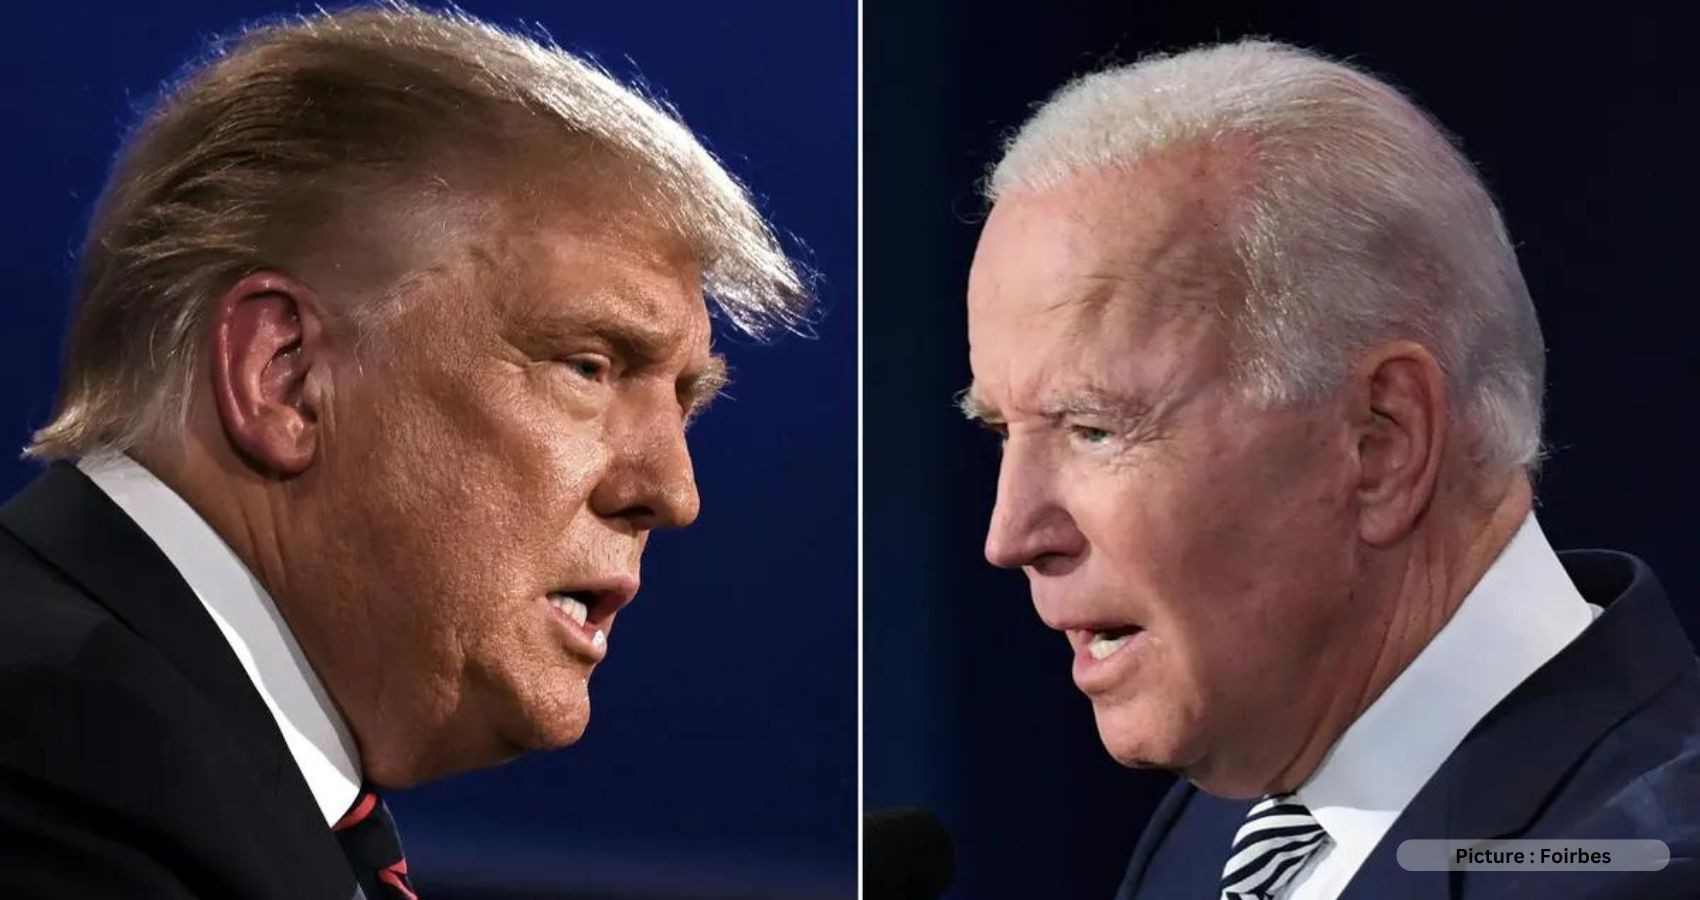 Trump Leads Hypothetical 2024 Election Rematch against Biden, Poll Shows